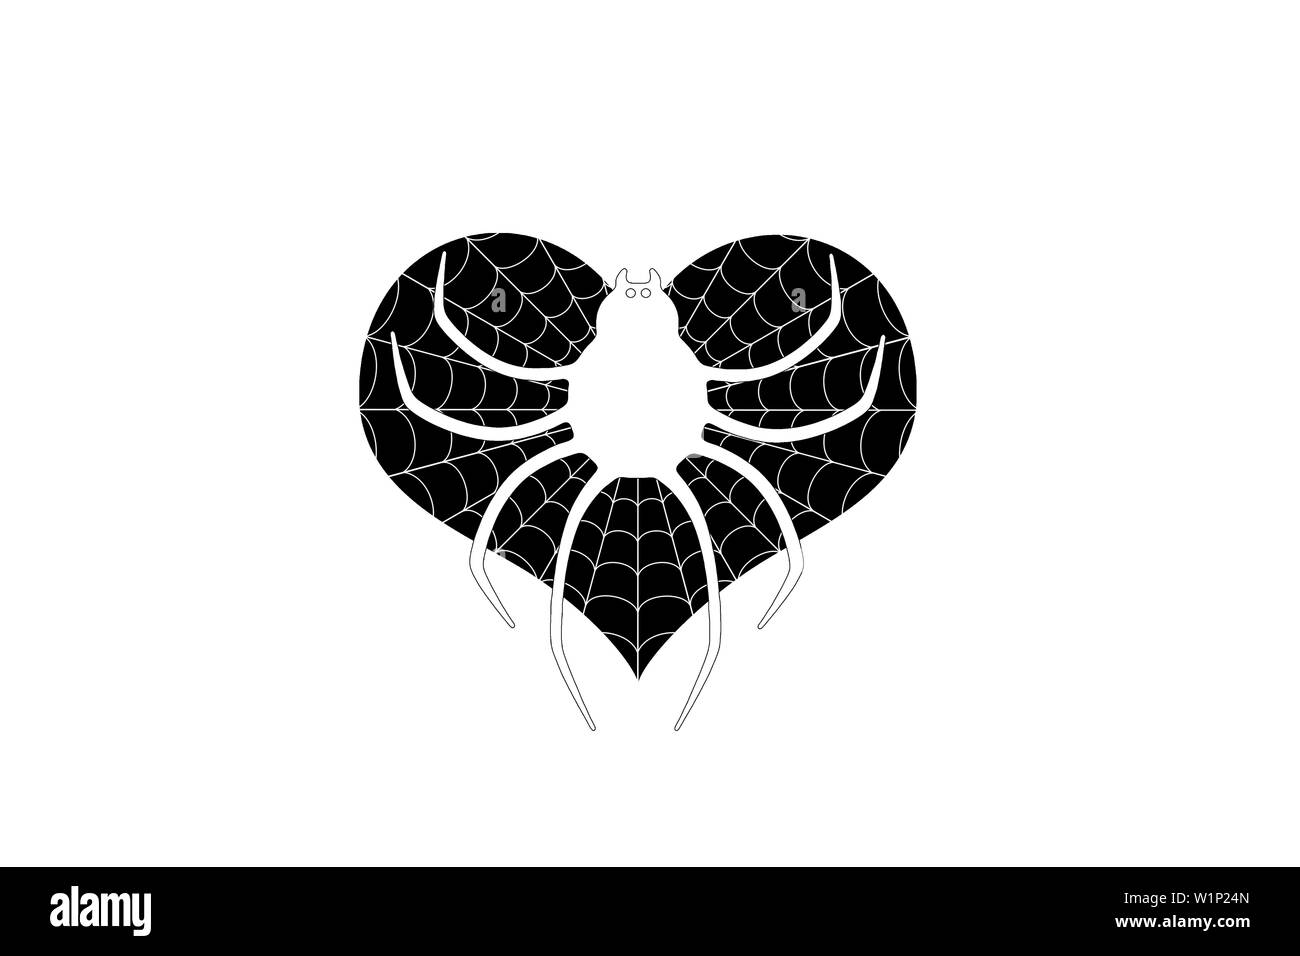 Illustration of a heart with a spider in the web Stock Photo